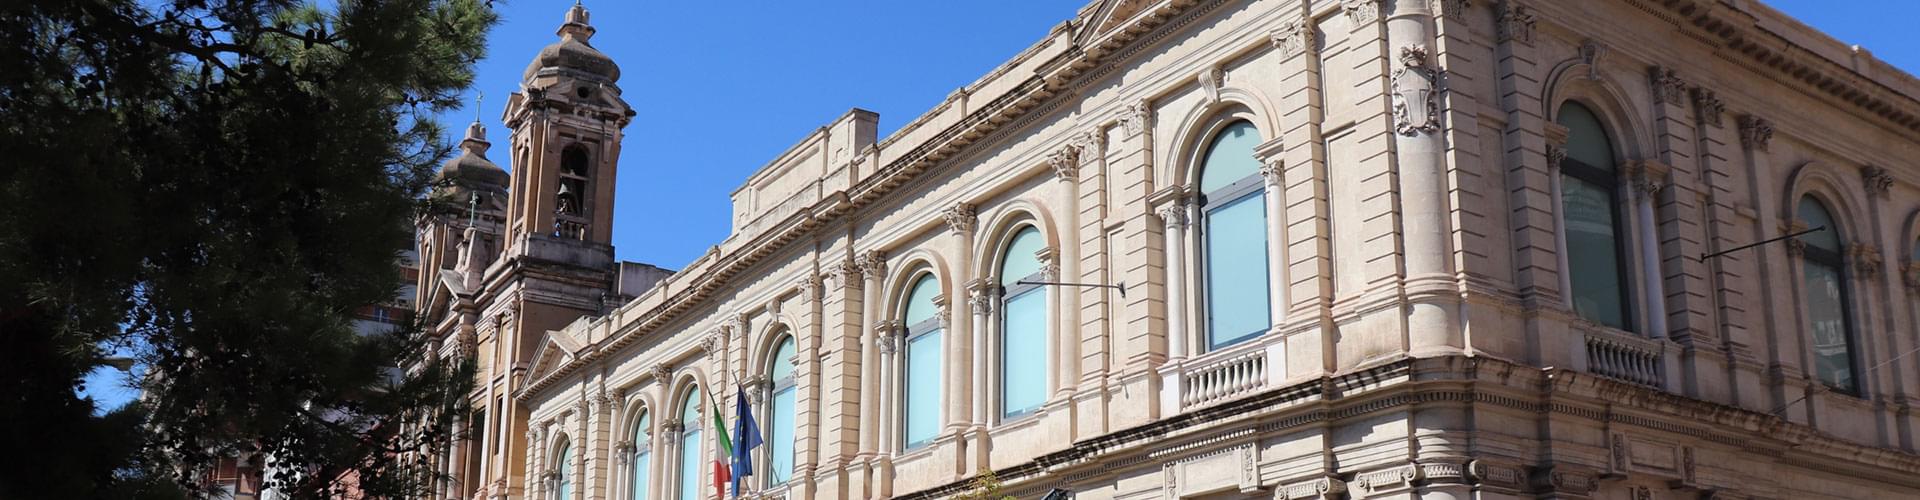 The National Archaeological Museum of Taranto